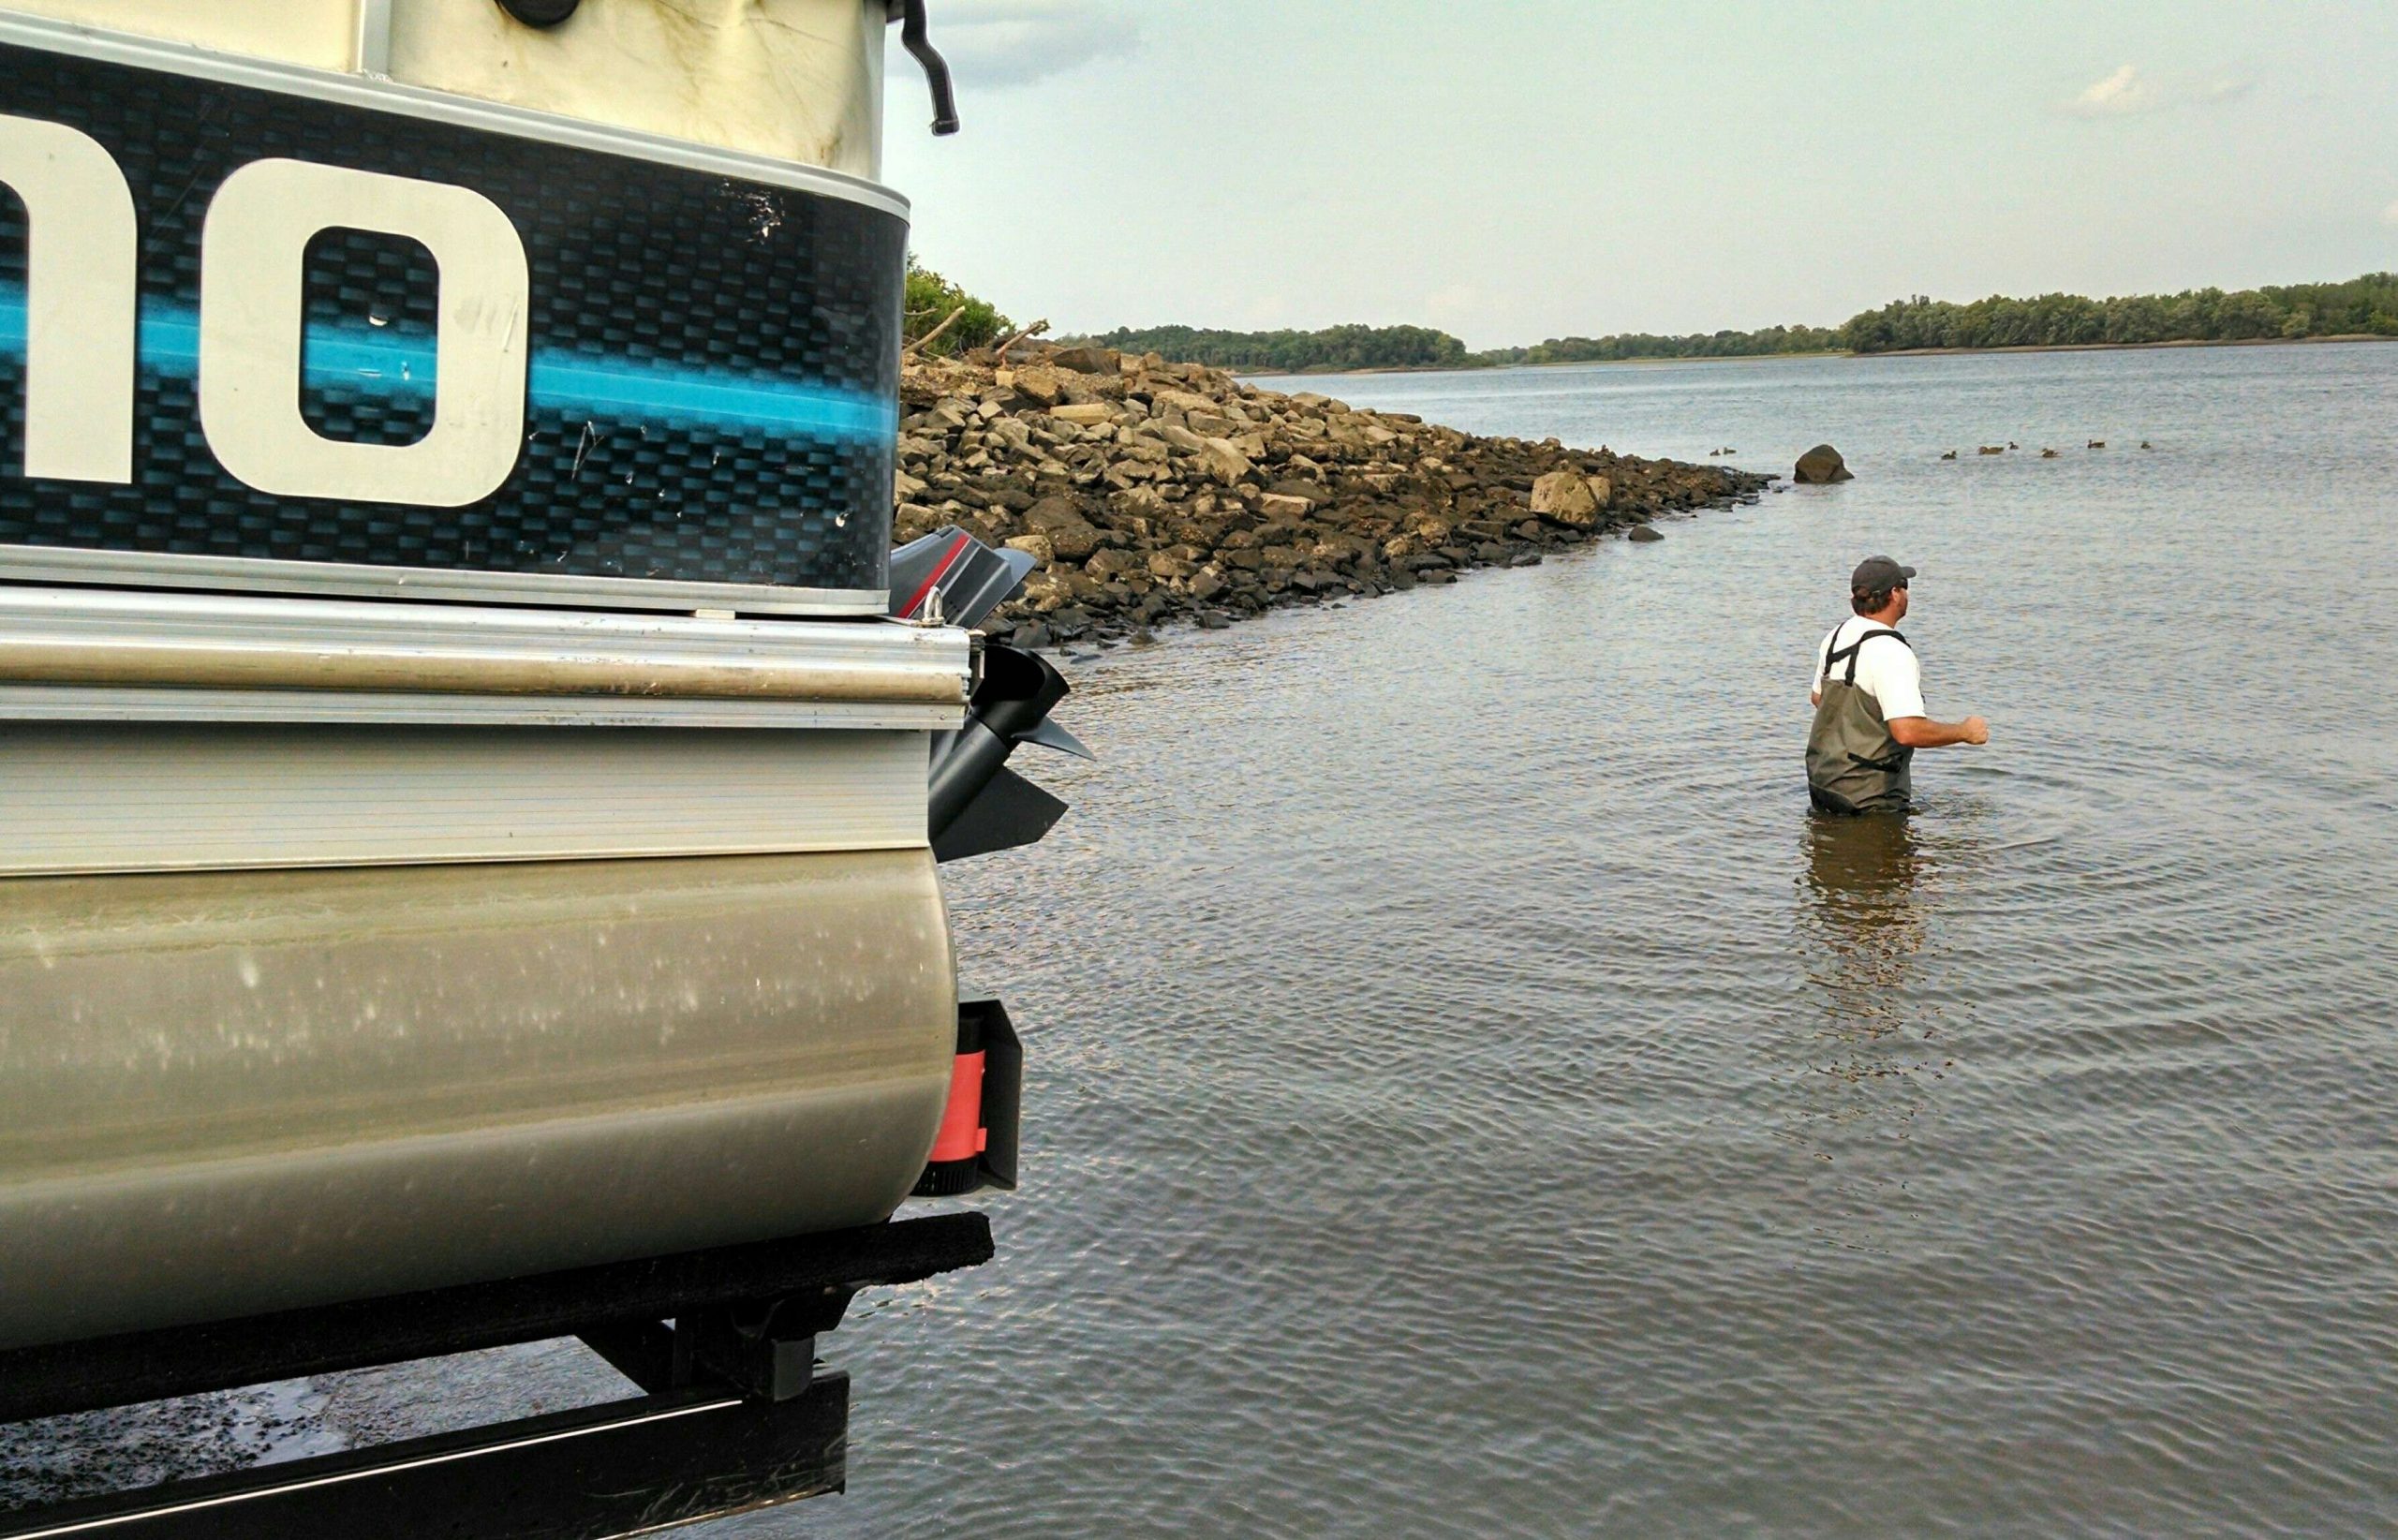 Upon arrival at the boat ramp on Day 1 of the Bassmaster Elite at Delaware River, we realized the tide was out and the water was too low to launch the Shimano Live Release boat. Joe Tusing, a biologist with the Pennsylvania Fish and Boat Commission (PAFBC), confirmed our inability to launch -- in his waders!